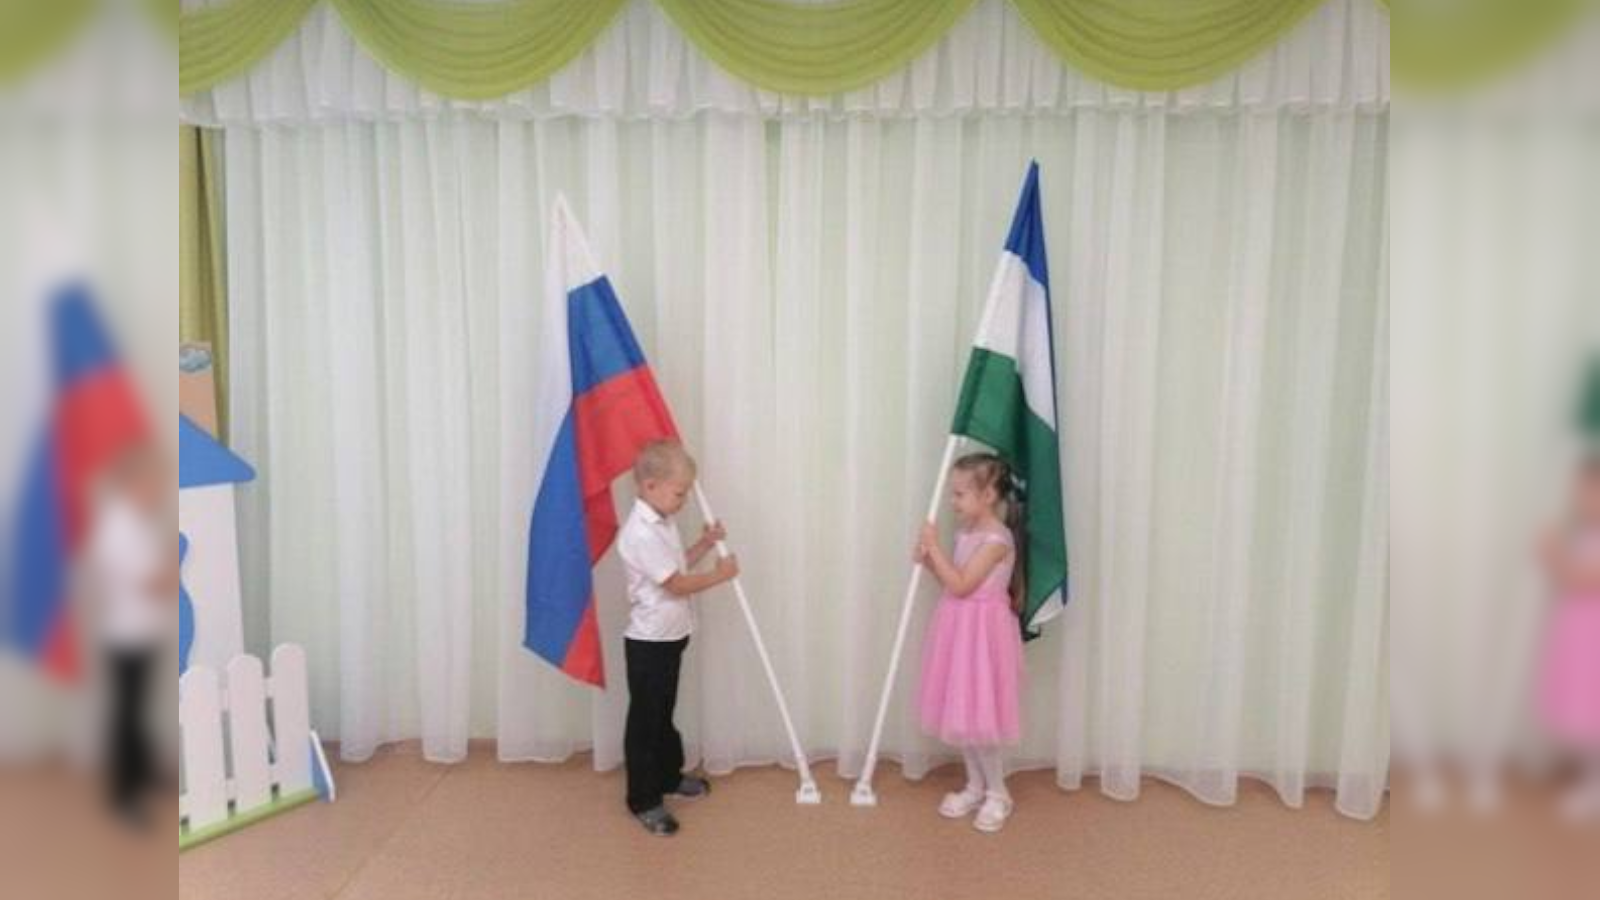 In Bashkortostan, now every morning in kindergartens they will raise the flags of the Russian Federation and the Republic of Bashkortostan, as well as sing two hymns